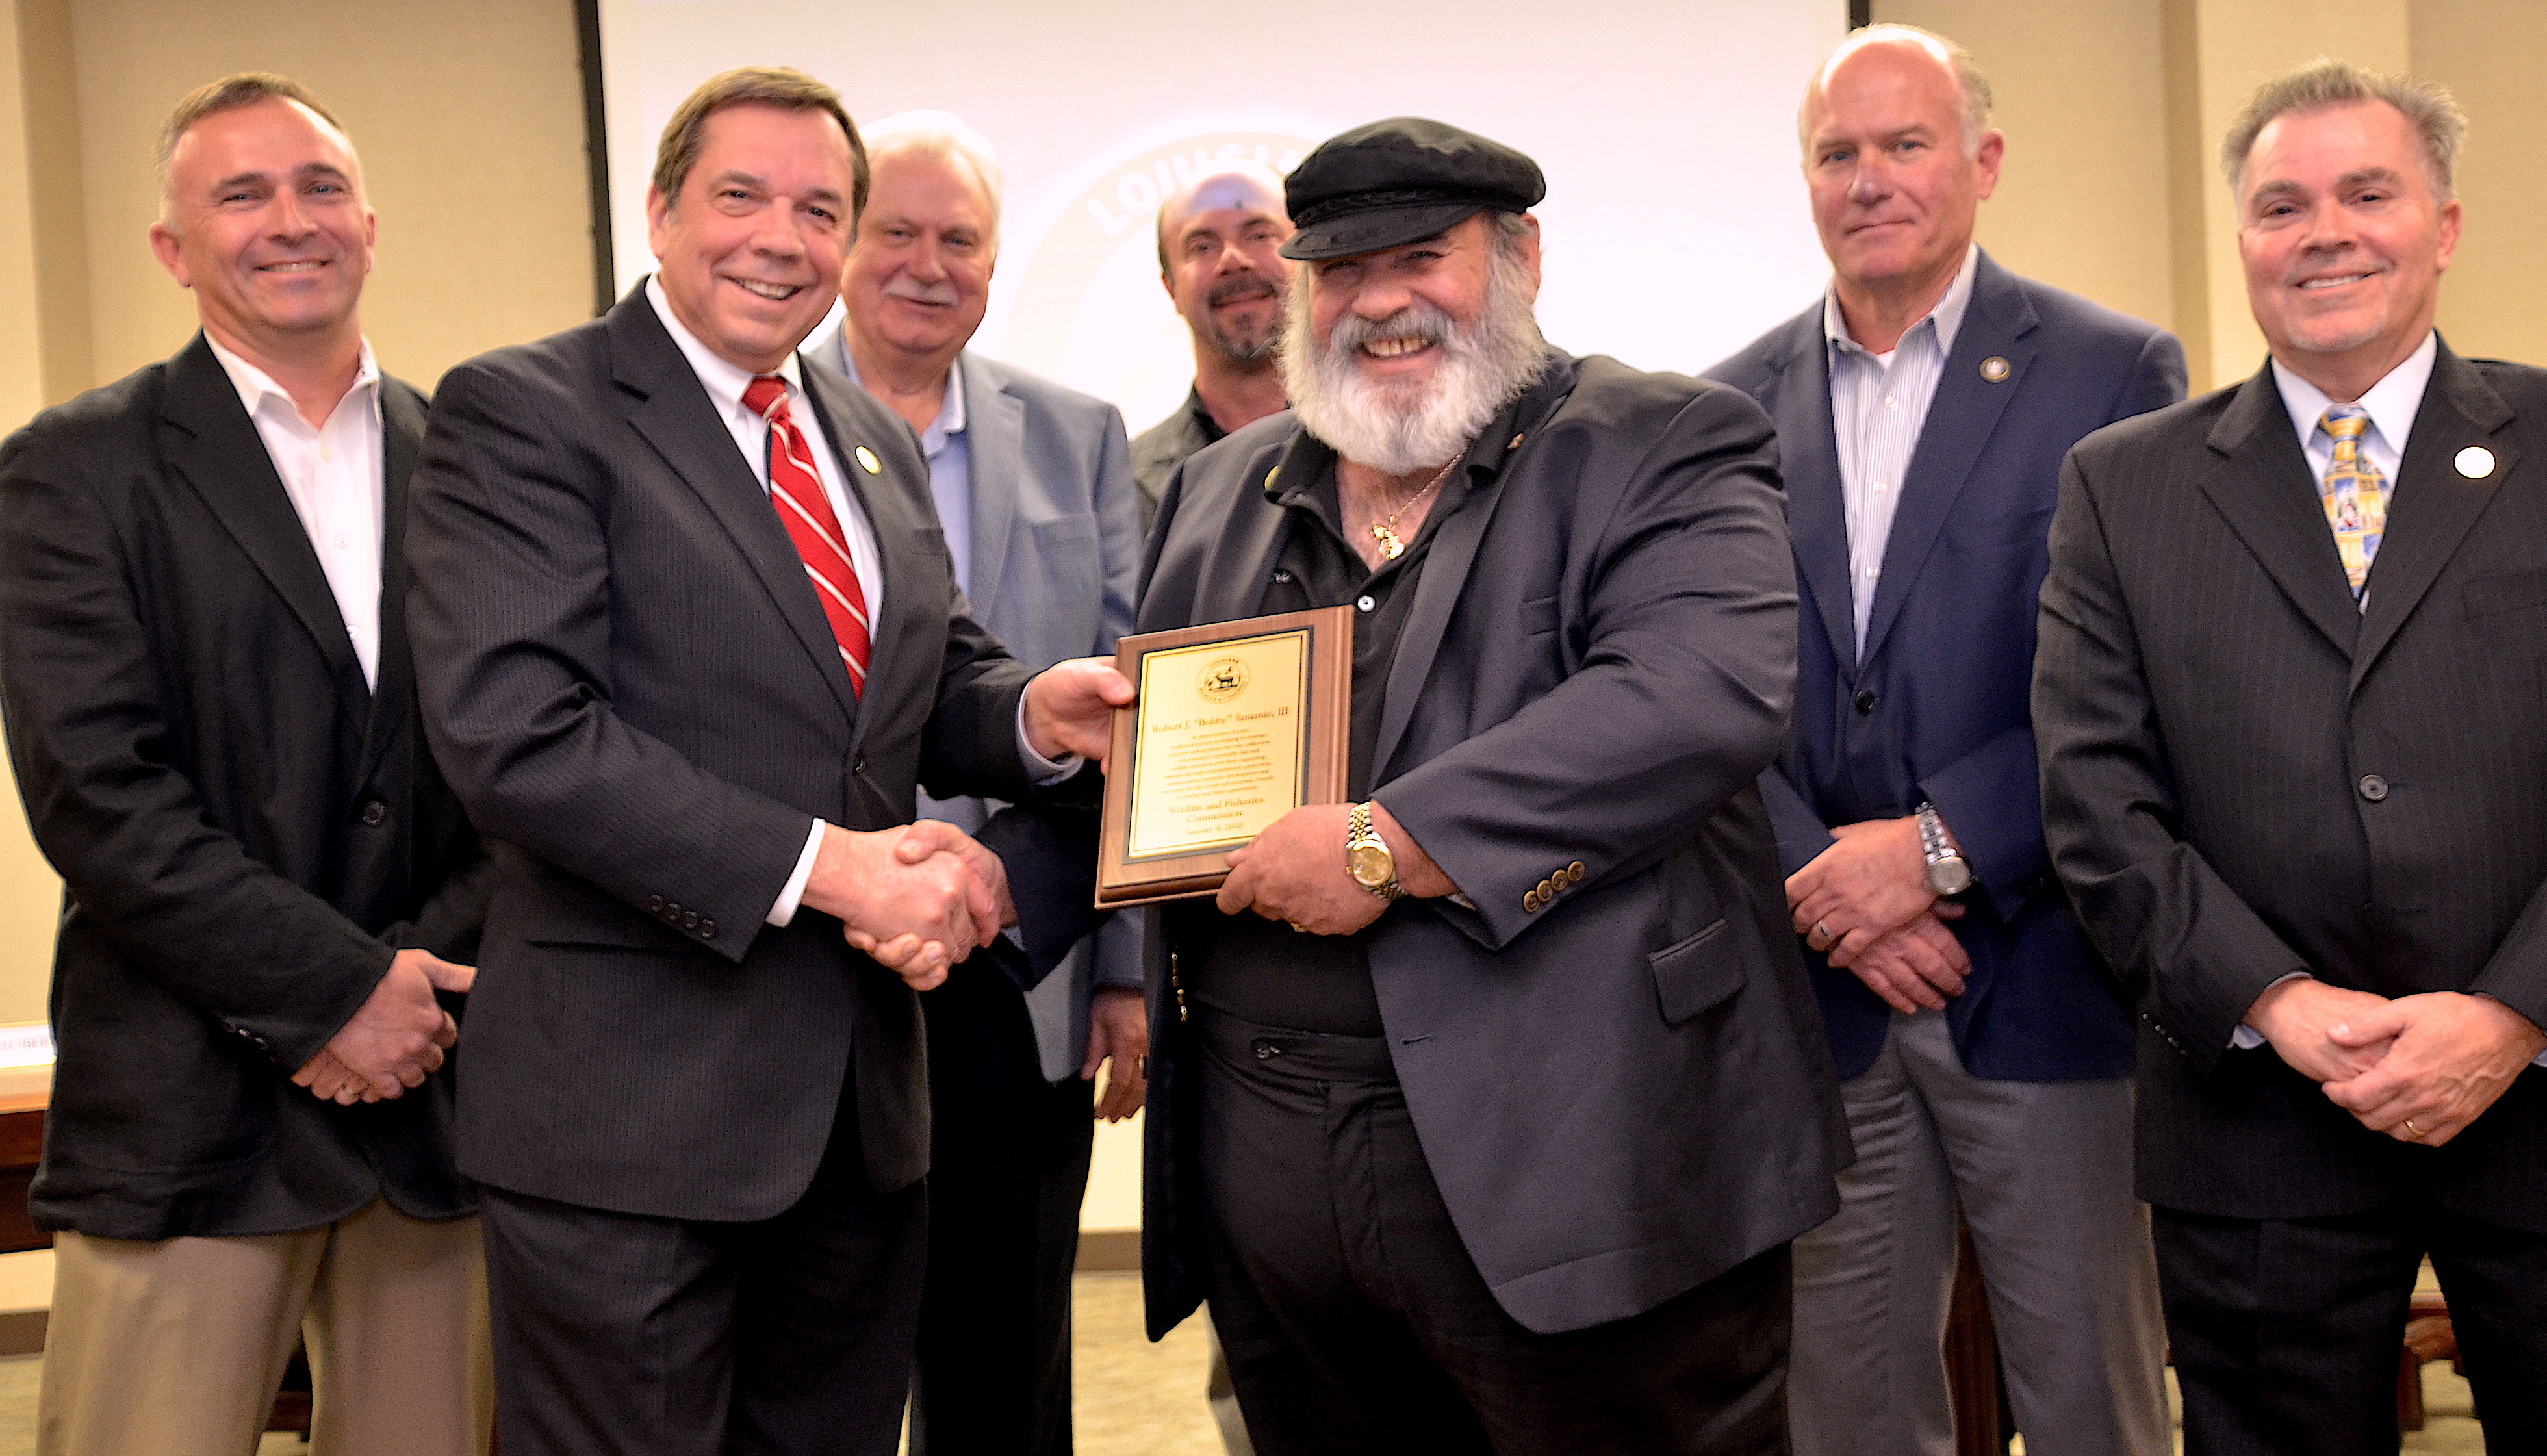 Bobbie Samanie Honored at January 2020 Commission Meeting